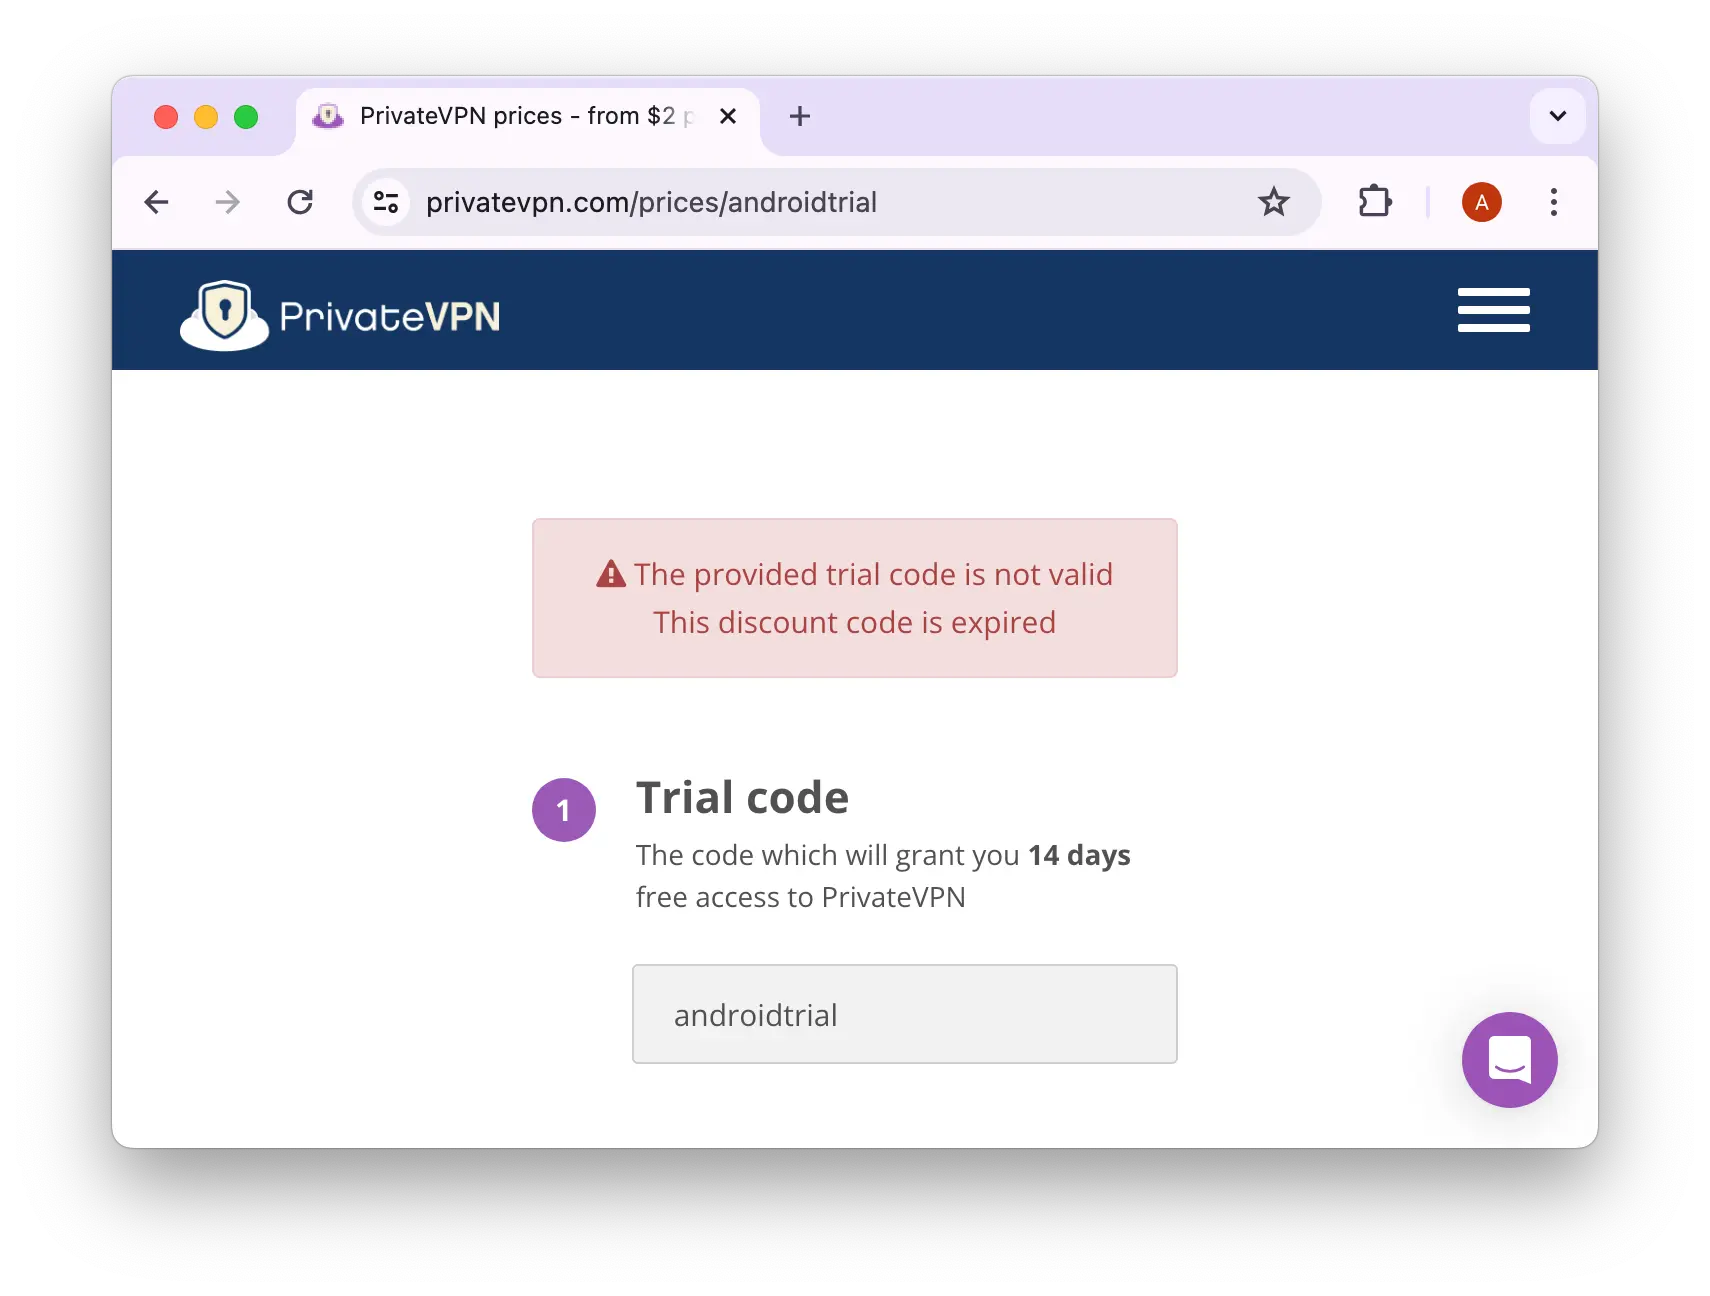 PrivateVPN "androidtrial" code is expired